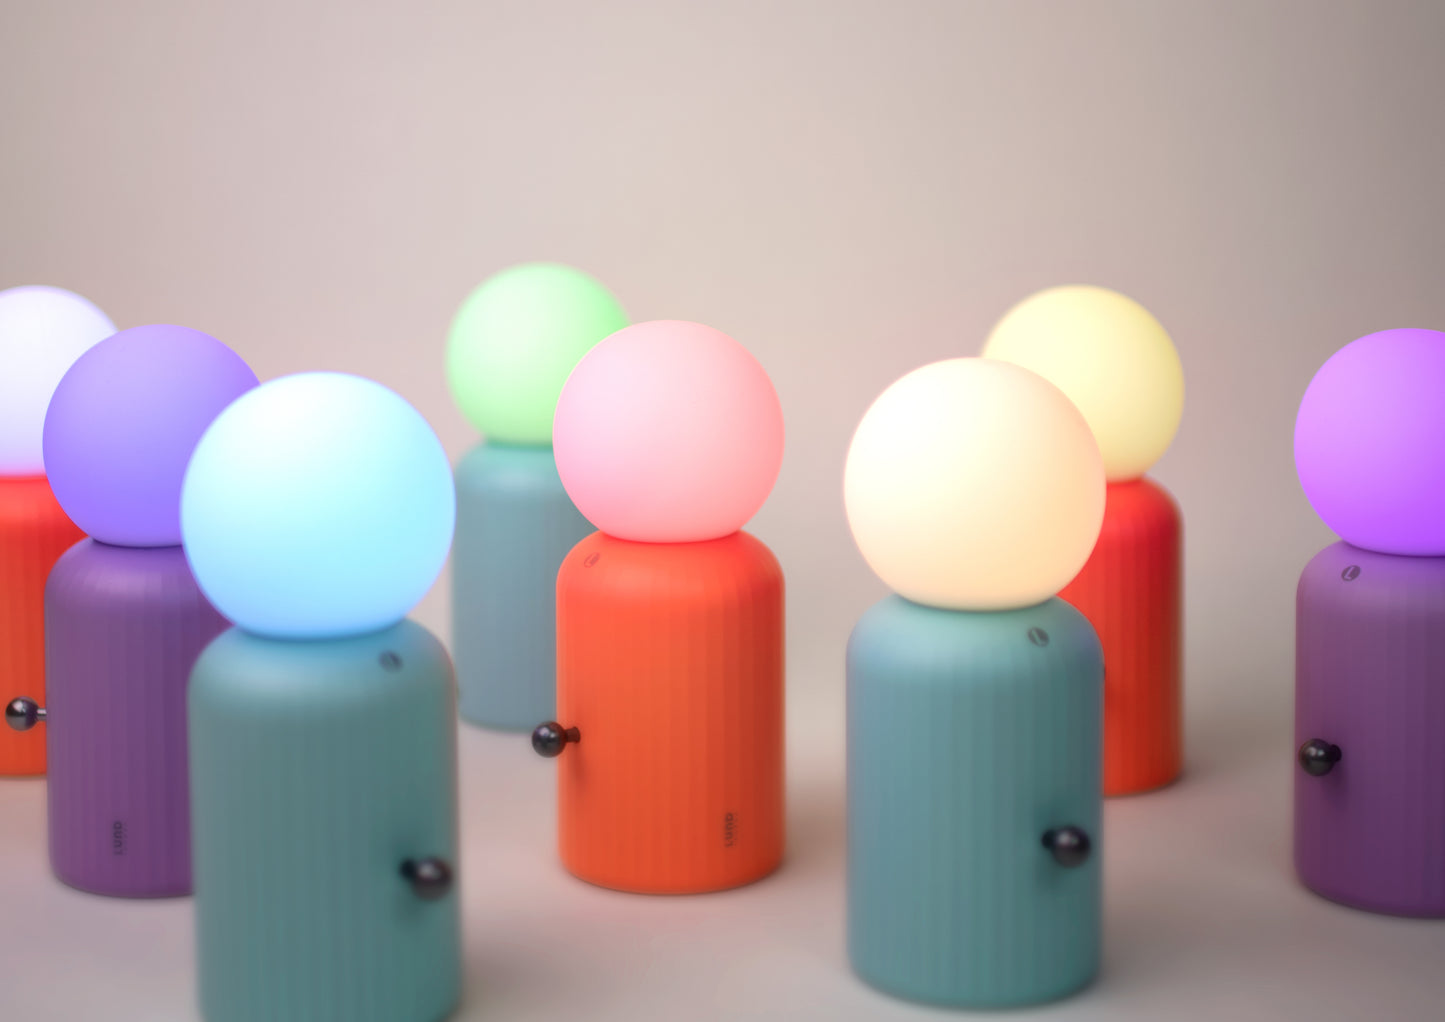 Skittle Wireless Lamp with Phone Charger